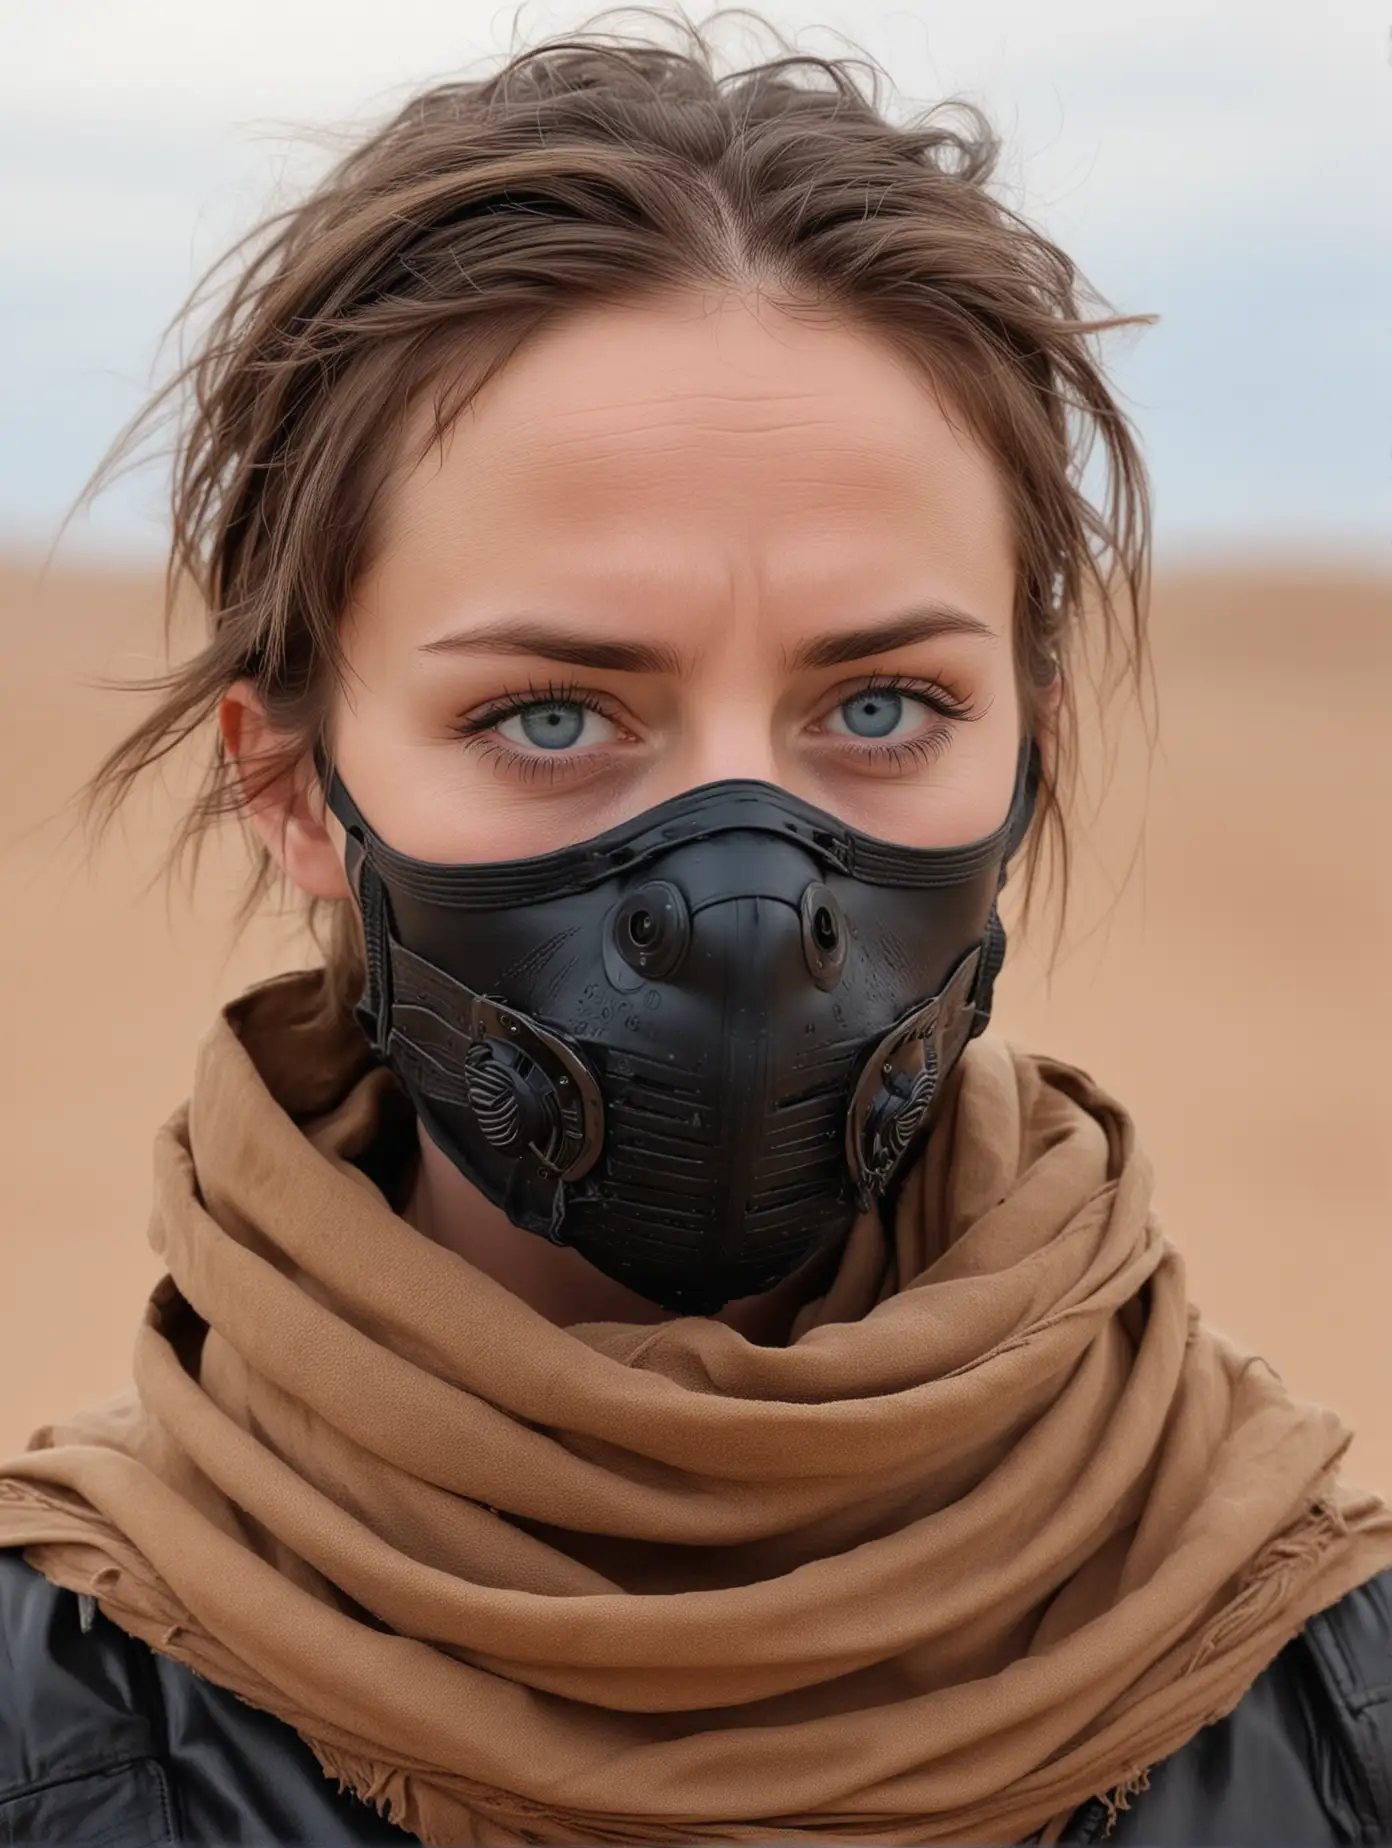  full portrait woman with weather-roughened skin, blue-on-blue eyes (blue sclera), heavy eyebrows. wearing brown leather and a black stillsuit breathing mask covers her lower face. A sand-colored dust scarf covers her hair. Desert background